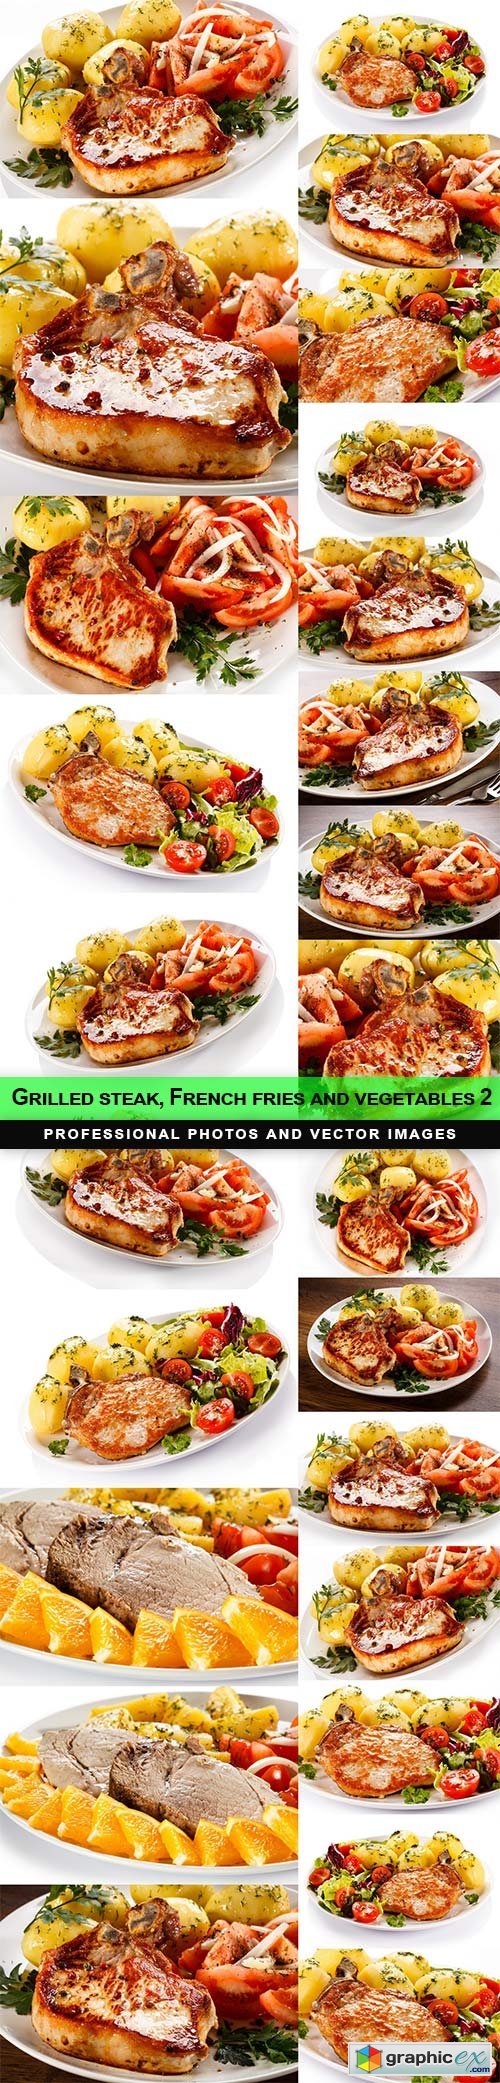 Grilled steak, French fries and vegetables 2